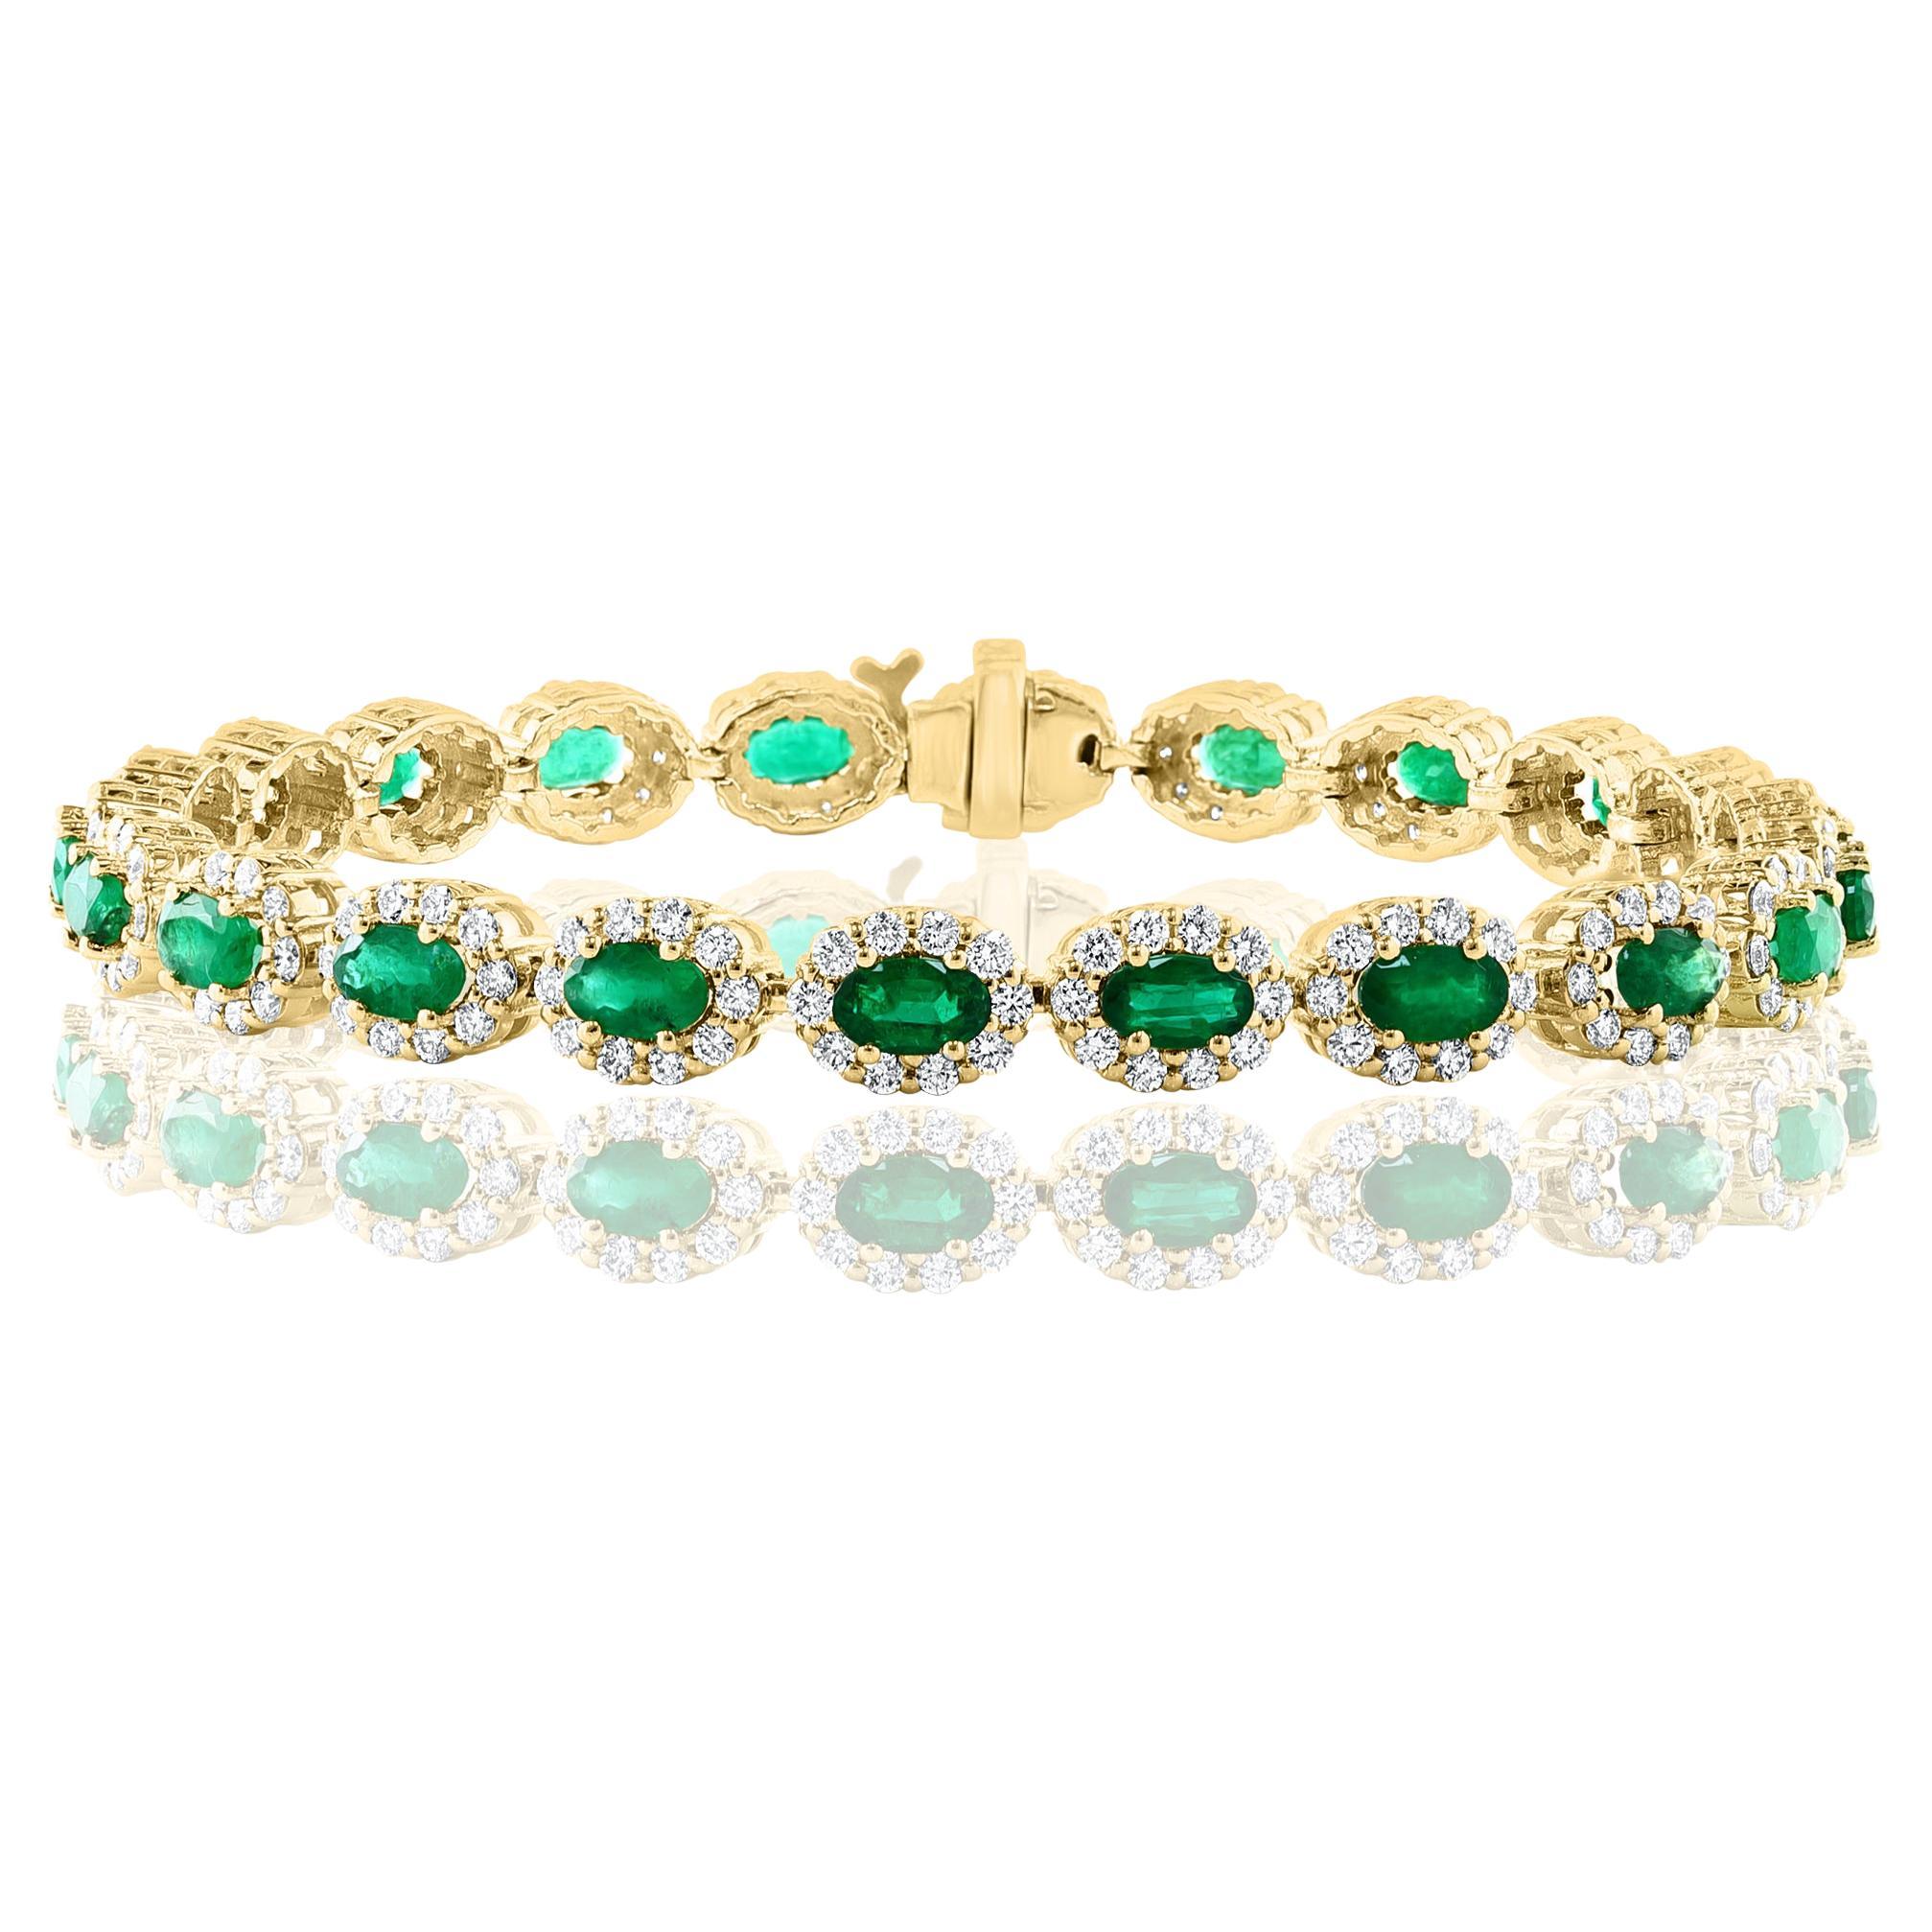 4.69 Carat Oval Cut Emerald and Diamond Halo Bracelet in 14K Yellow Gold For Sale